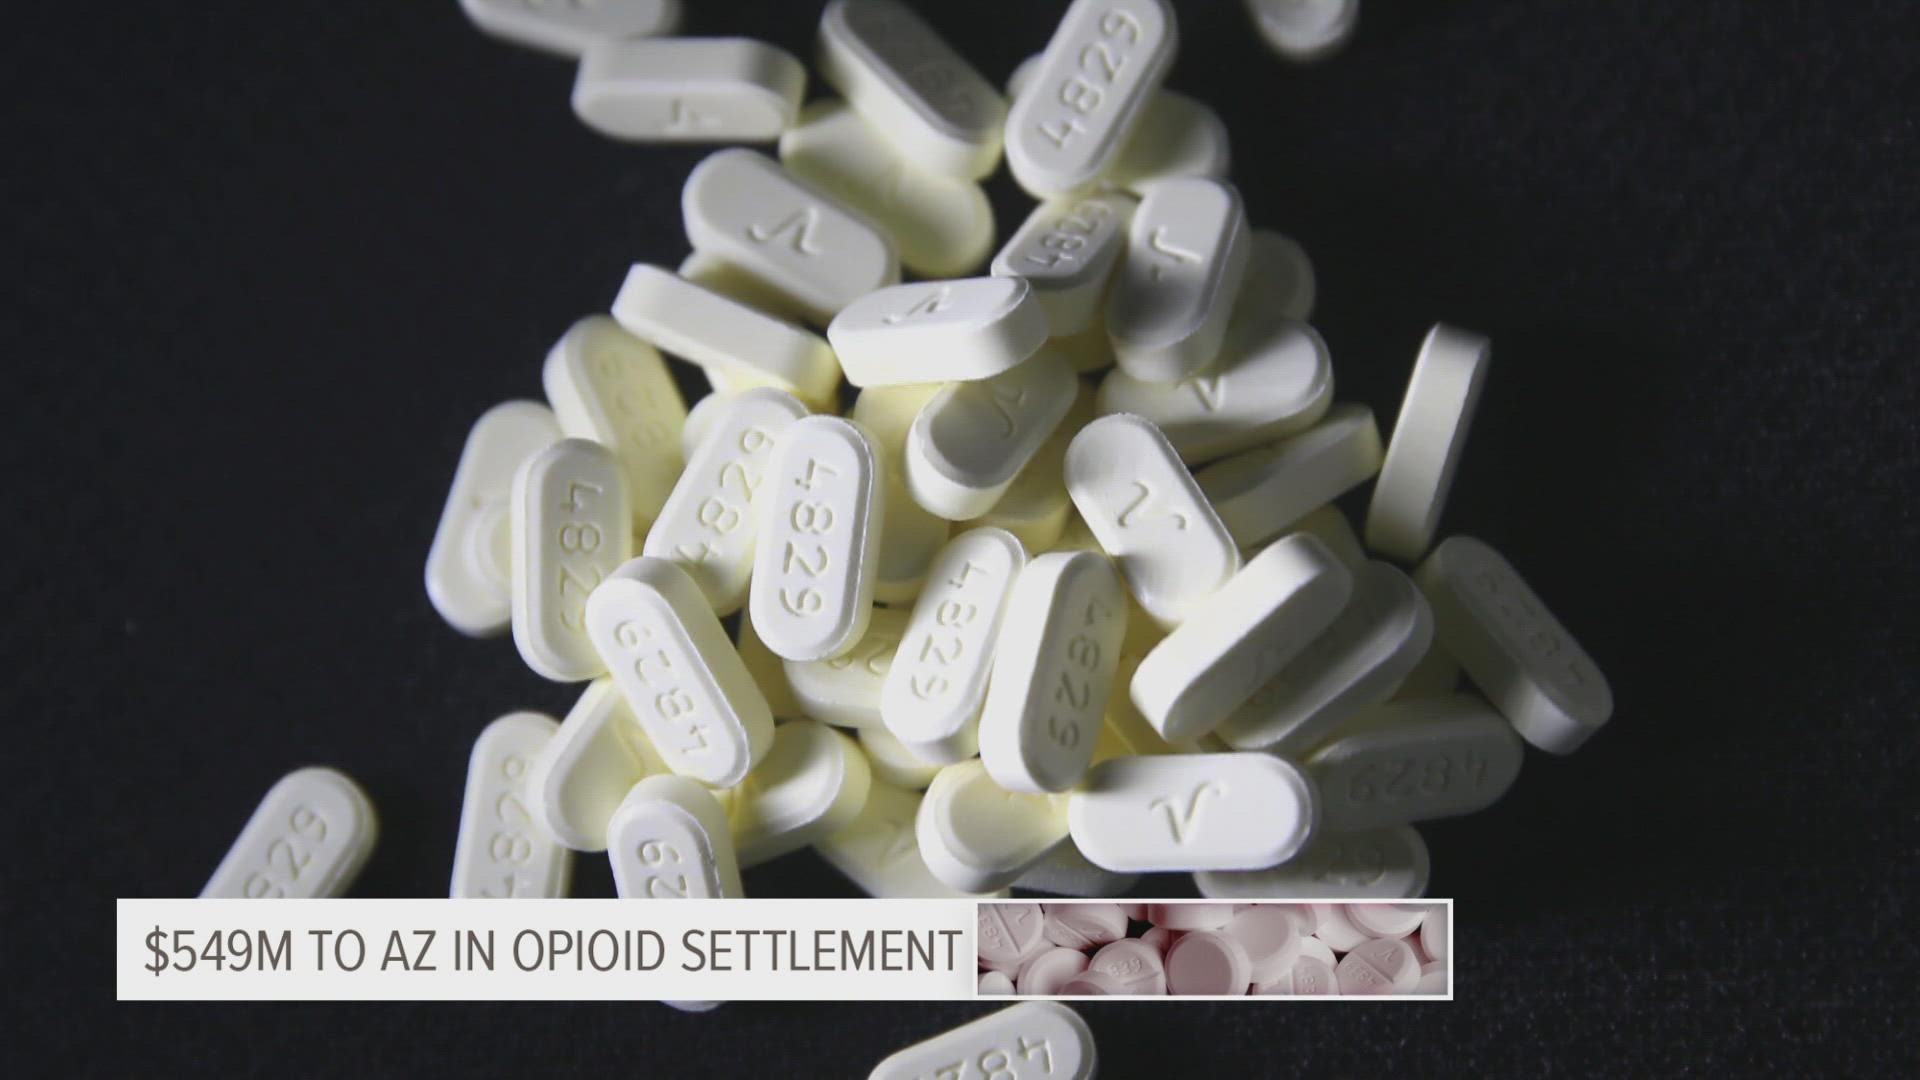 Arizona is getting a sliver of the $26 billion settlement, but advocates hope it will help prevent overdoses and treat those who are addicted to opioids.